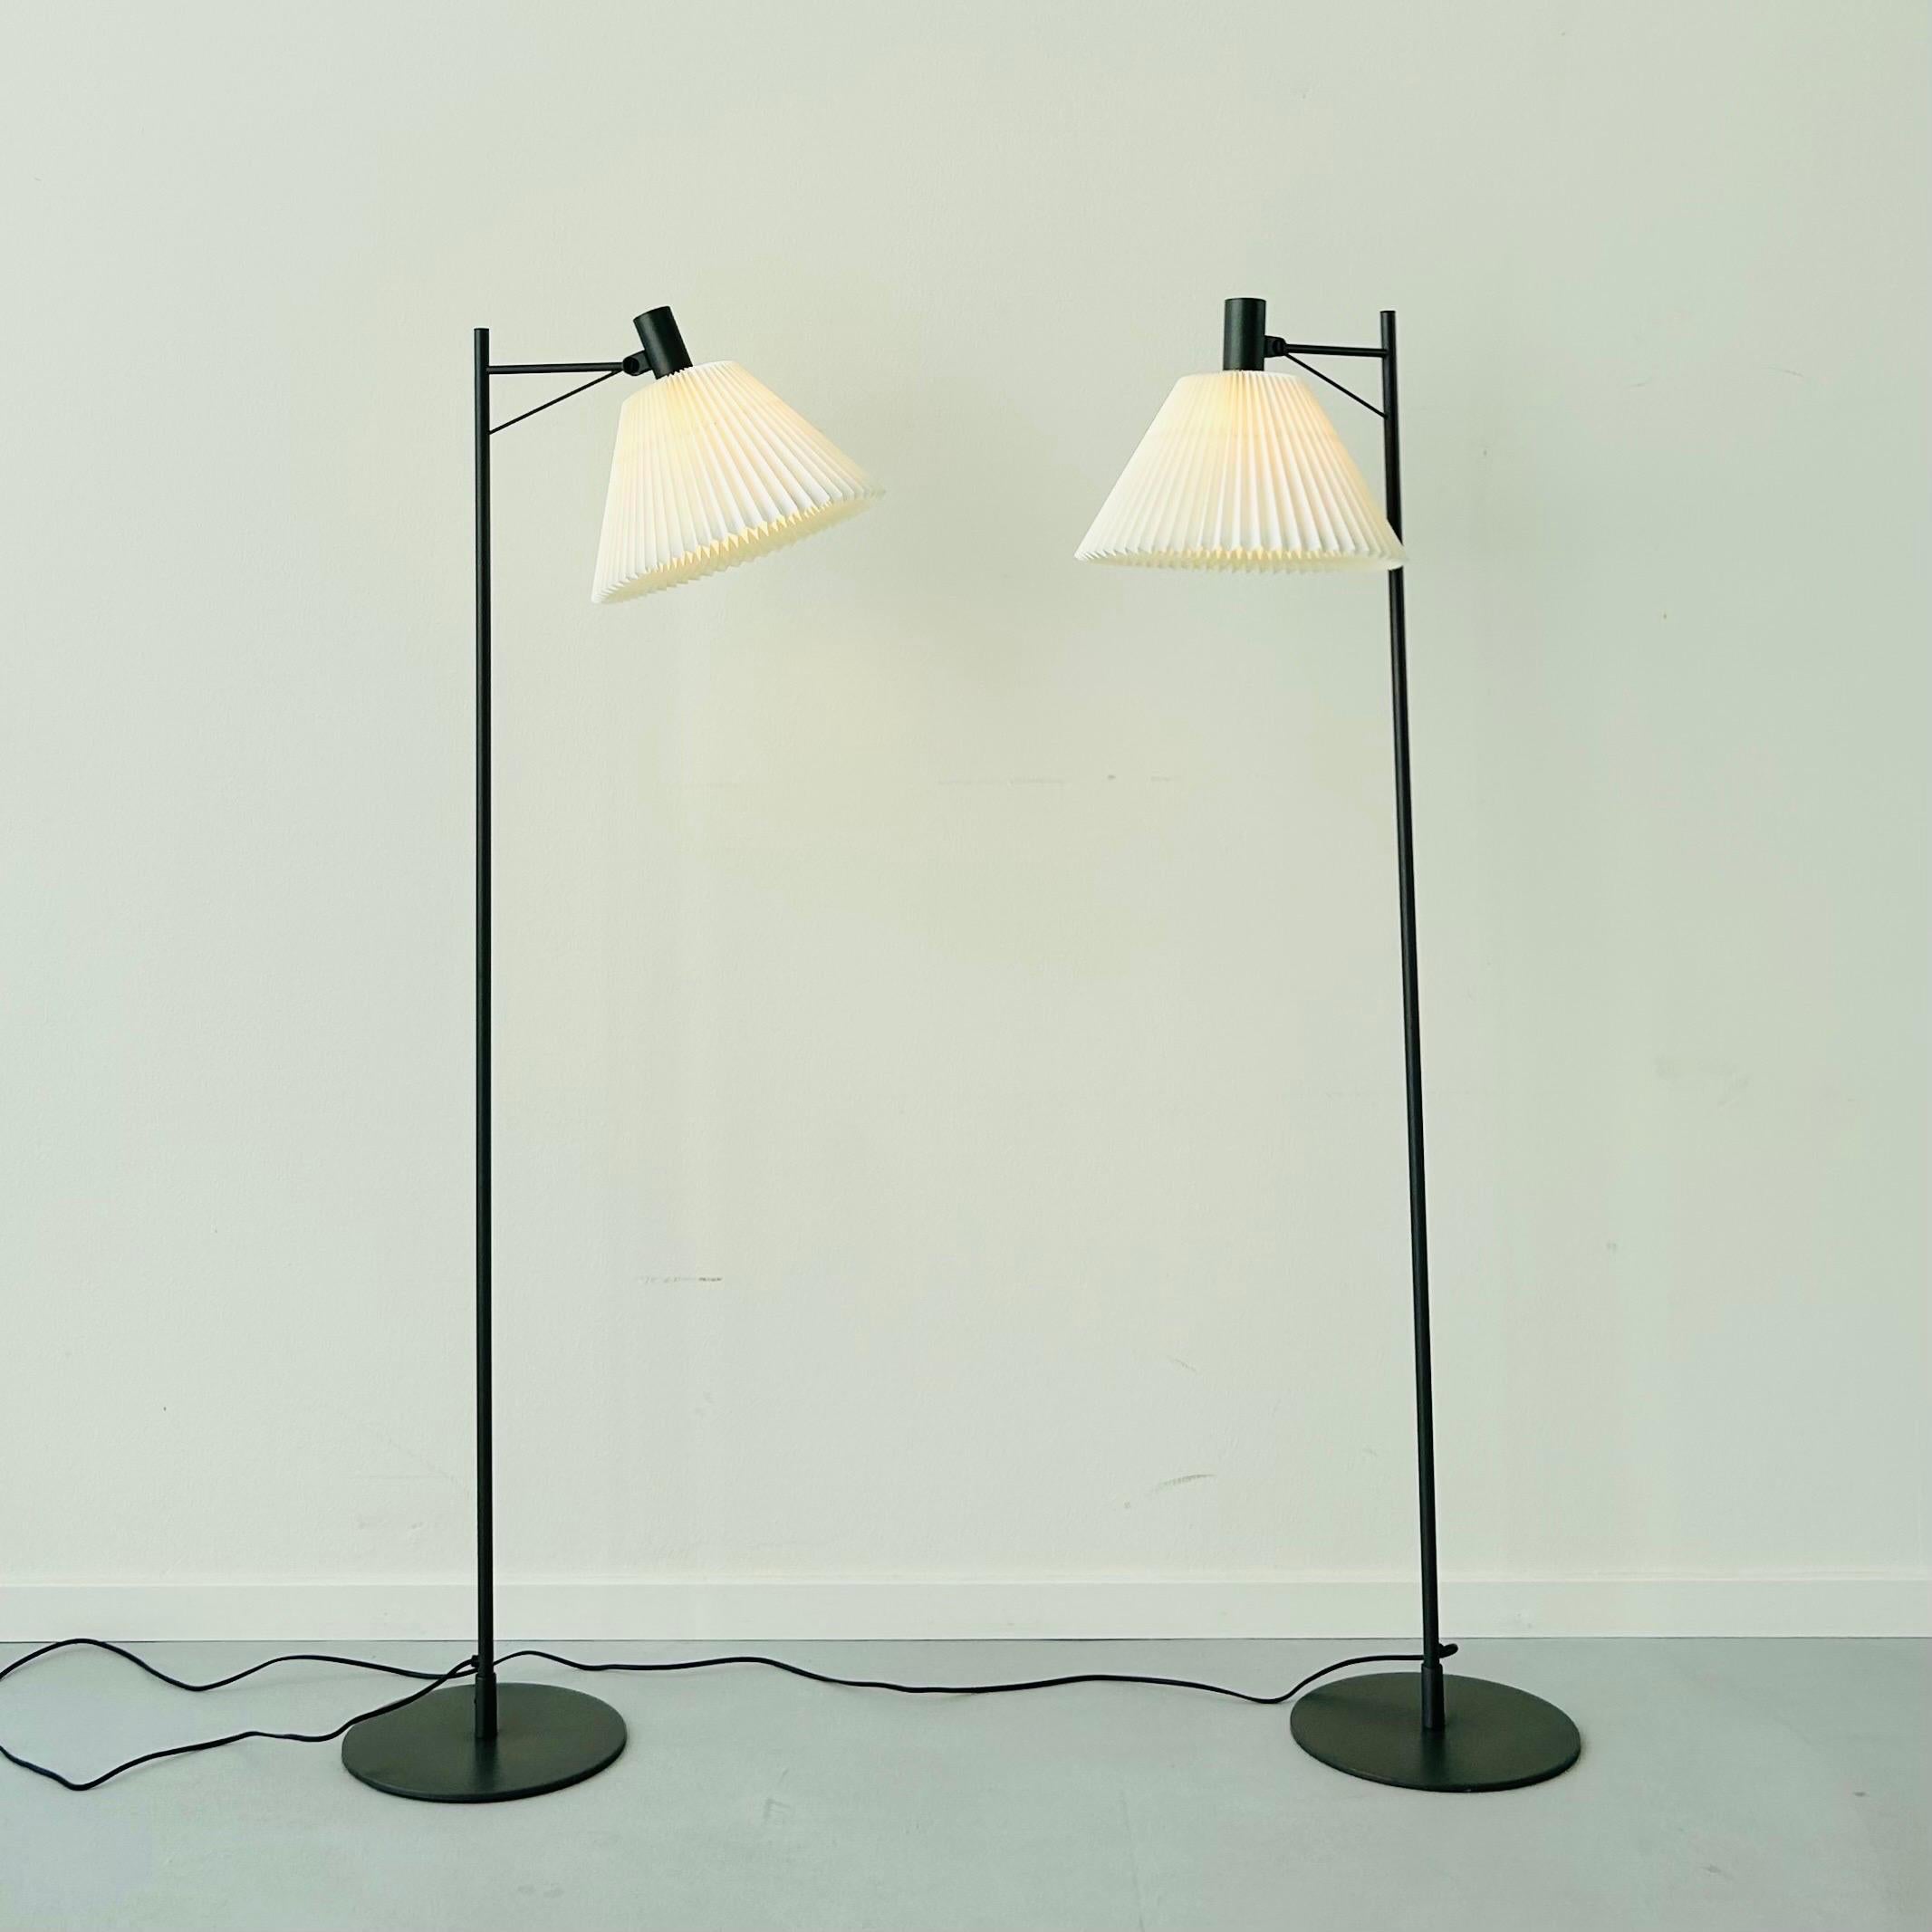 A set of classic straight-line Le Klint 372 floor lamps designed by Flemming Agger in the 1970s. They have practically no marks and come with never-used shades. 

* A set of antricit gray metal floor lamps with a white hand-pleated shade
* Designer: